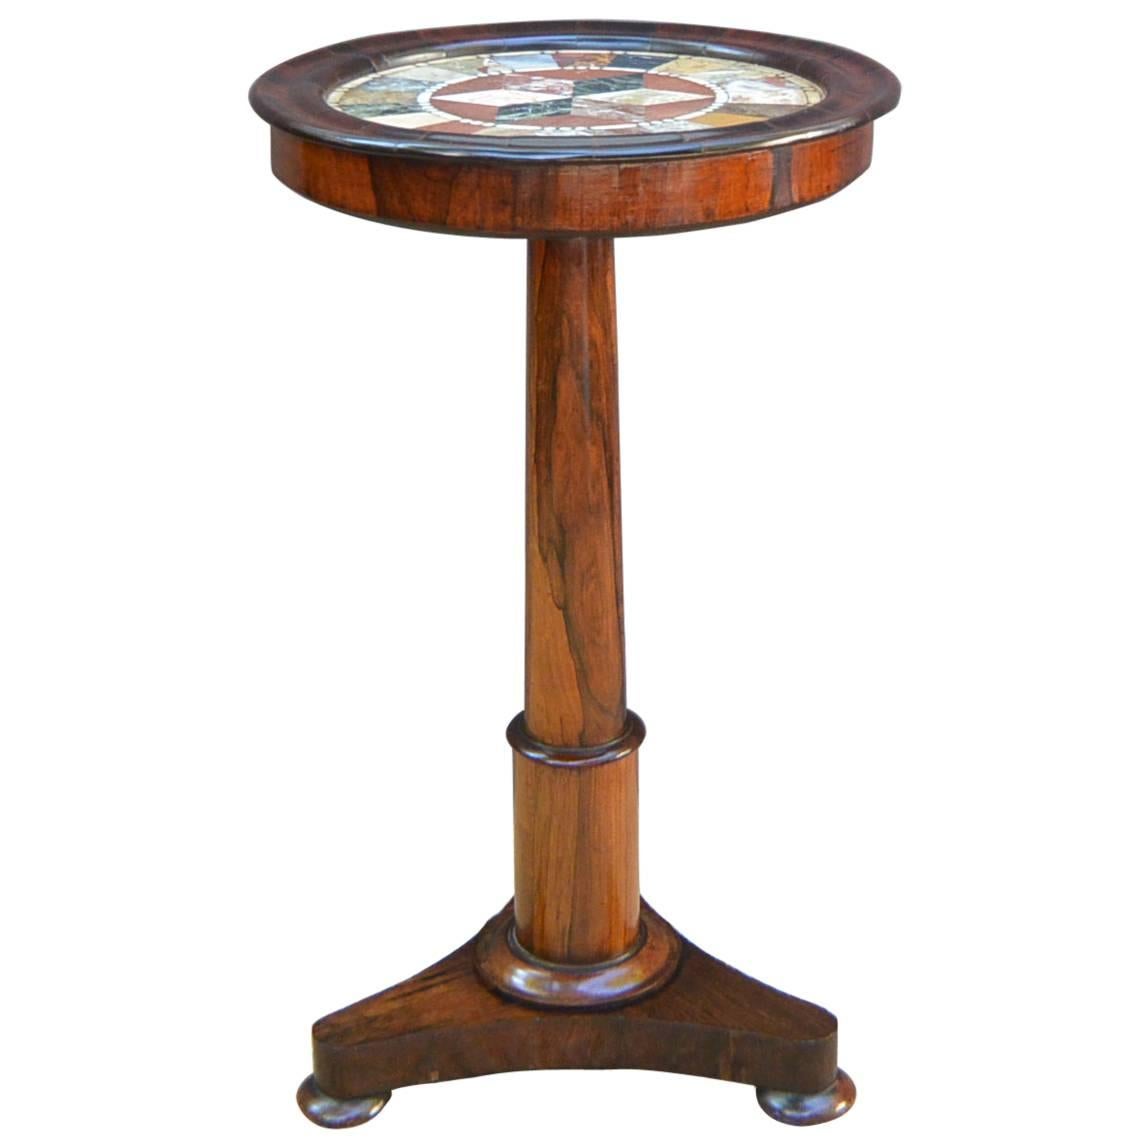 Italian marble specimen table. Charles X period palisander pedestal table with earlier inlaid antique Roman marble specimen top, Italy, circa 1830.
Dimension: 17.5